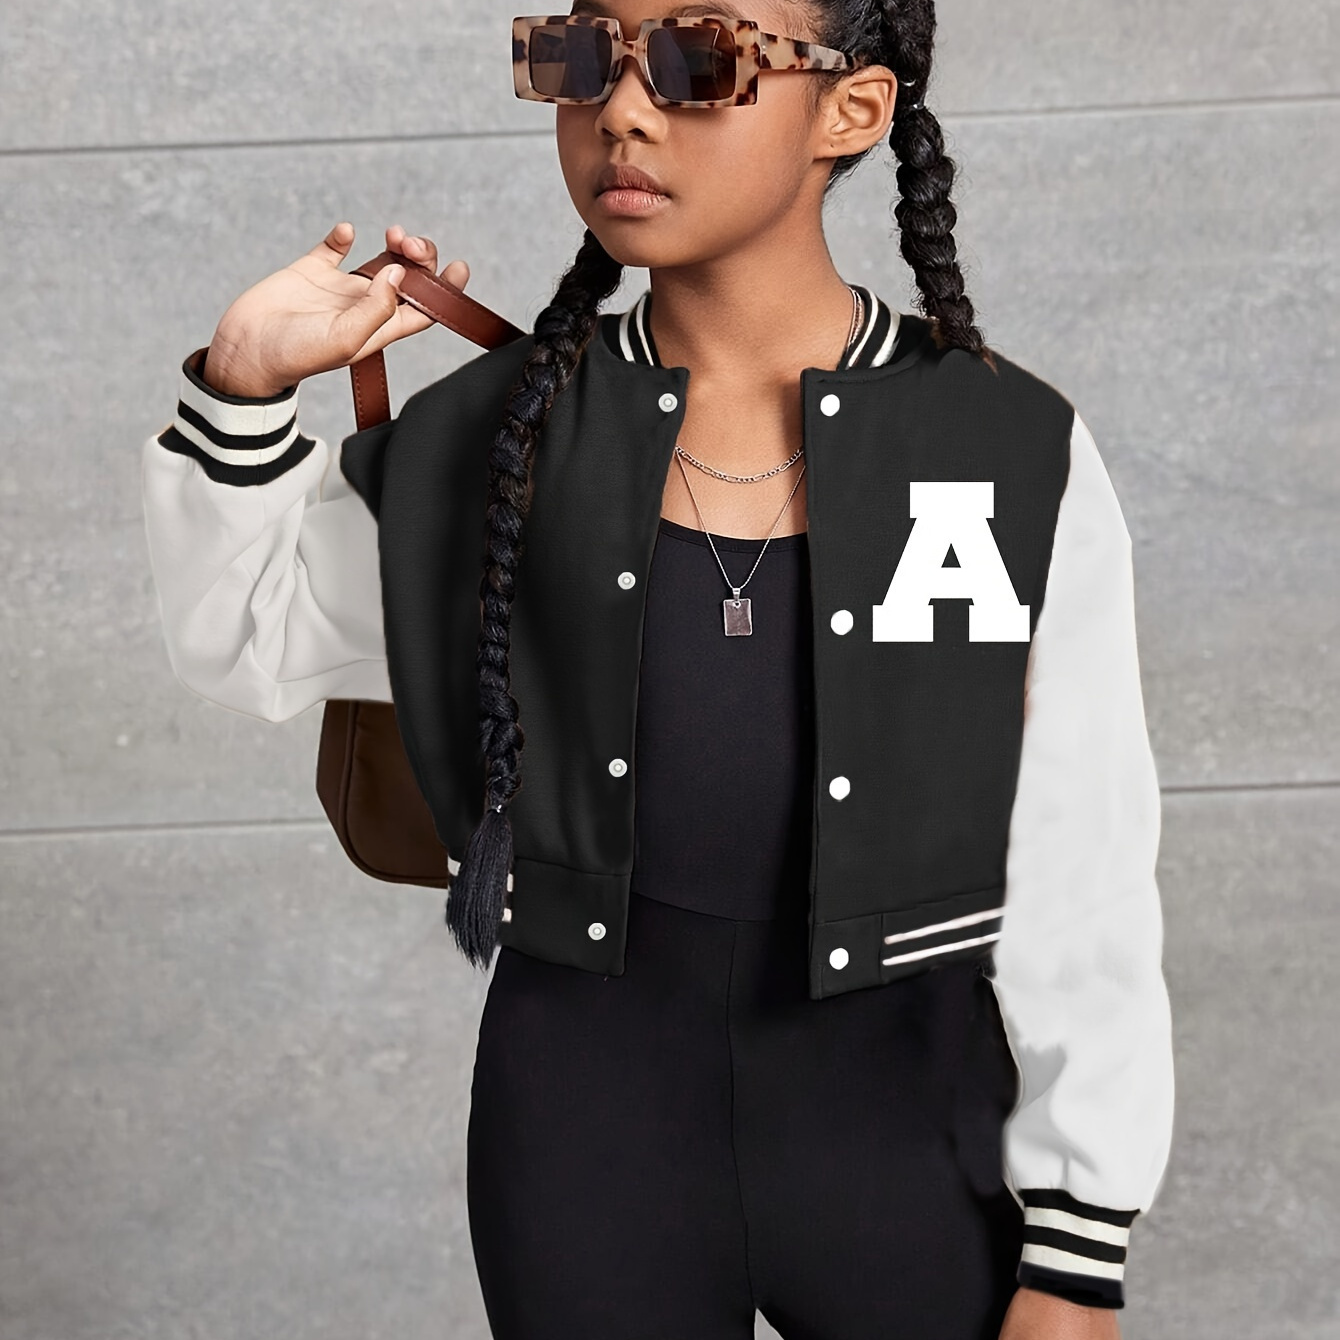 

Girl's Fashion Outdoor Cropped Jacket With Simple A Logo Print, Comfy Casual Two-tone Color Block Outerwear For Daily And Outdoor, Fall And Winter